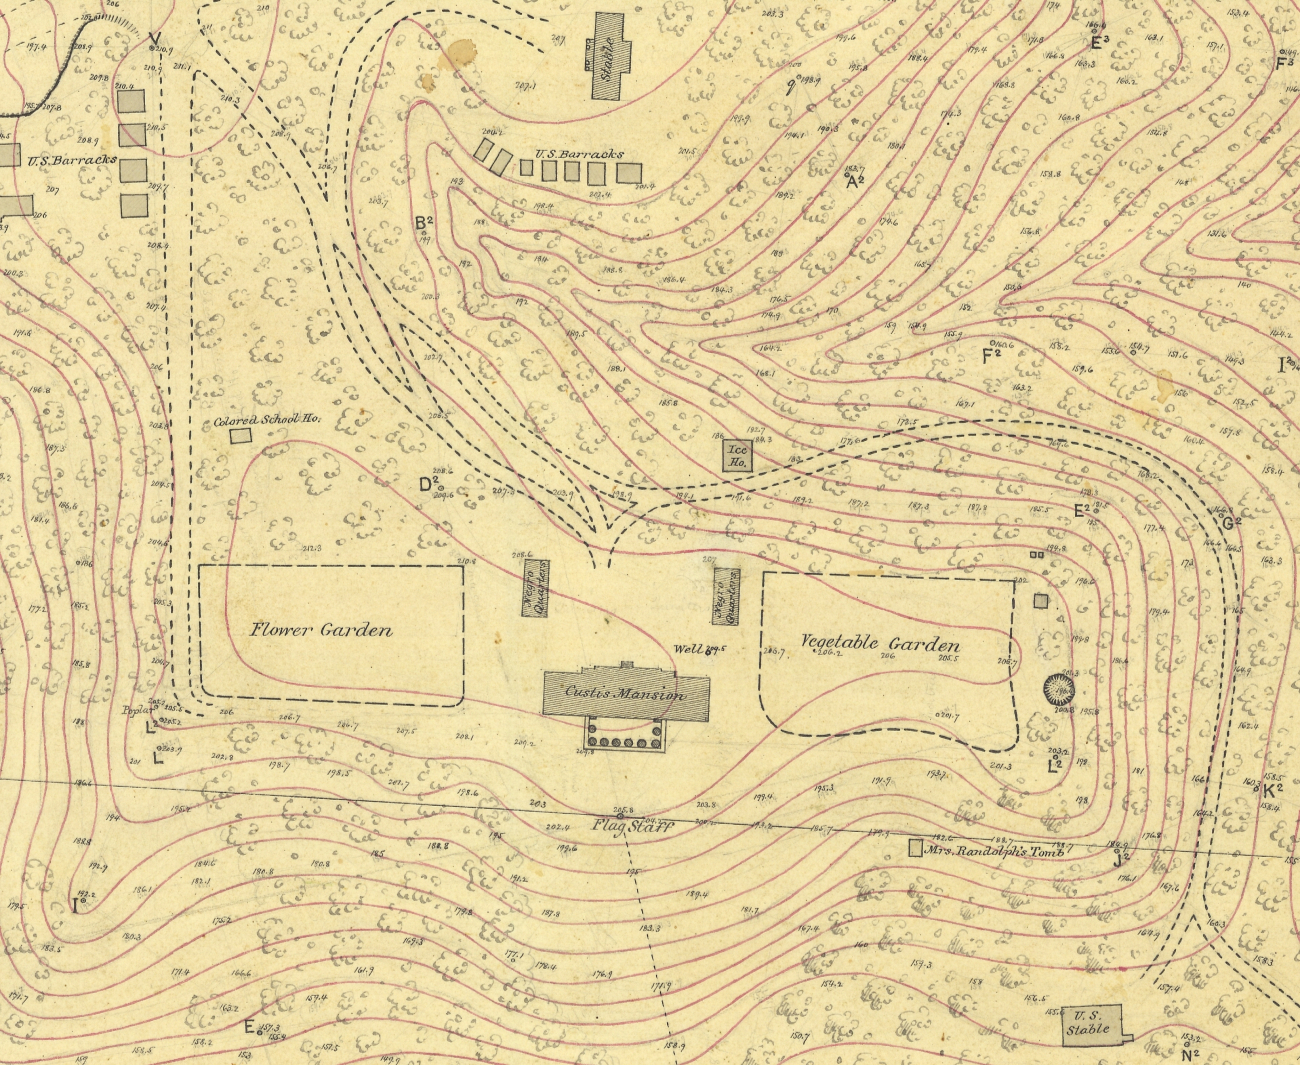 Portion of map of part of what is now Arlington National Cemetery showing theCustis Mansion surrounded by flower garden and vegetable garden